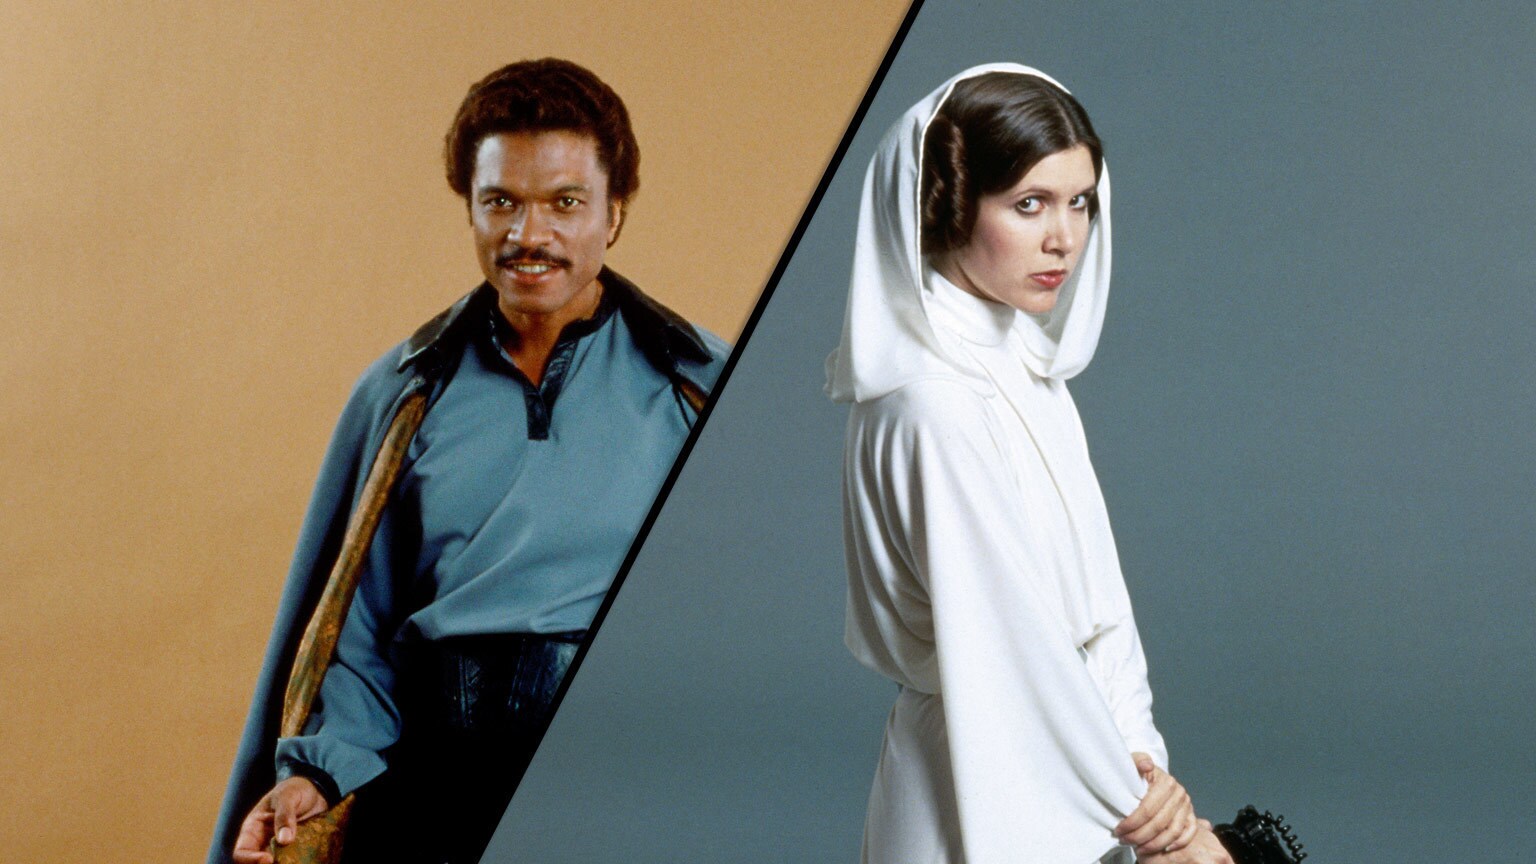 From a Certain Point of View: Who is the Galaxy's Best Dressed?